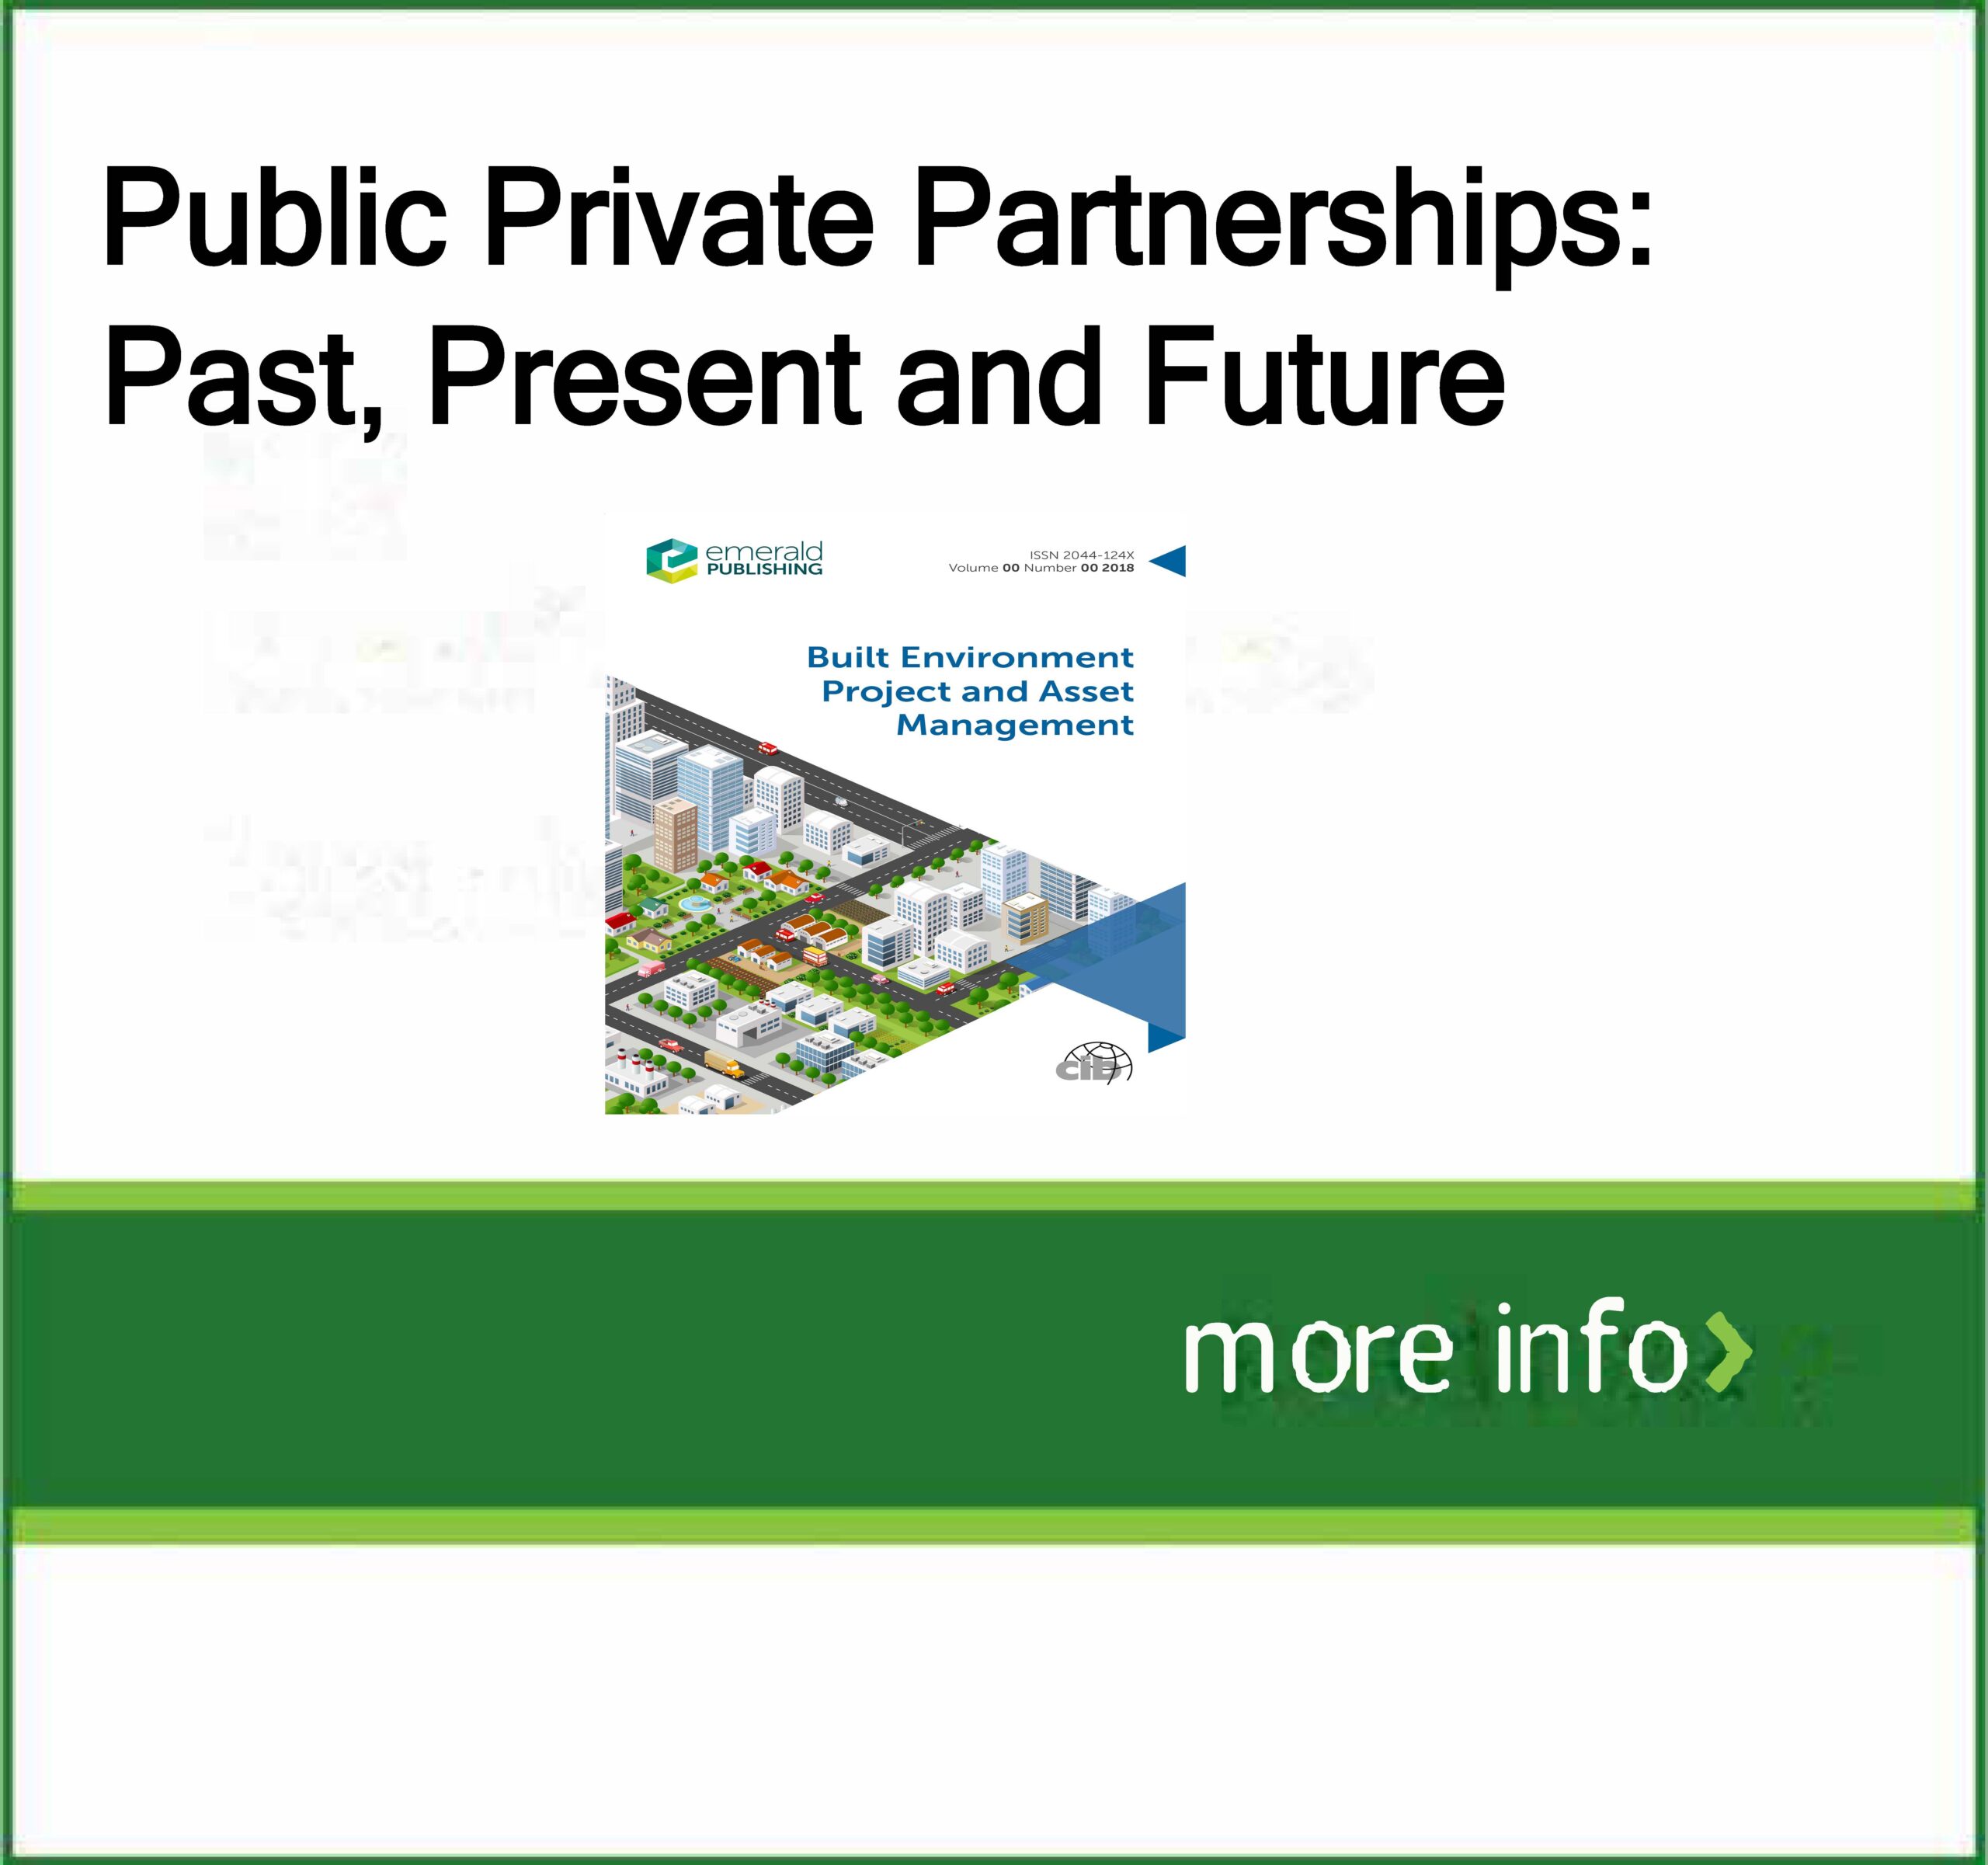 Public Private Partnerships: Past, Present and Future